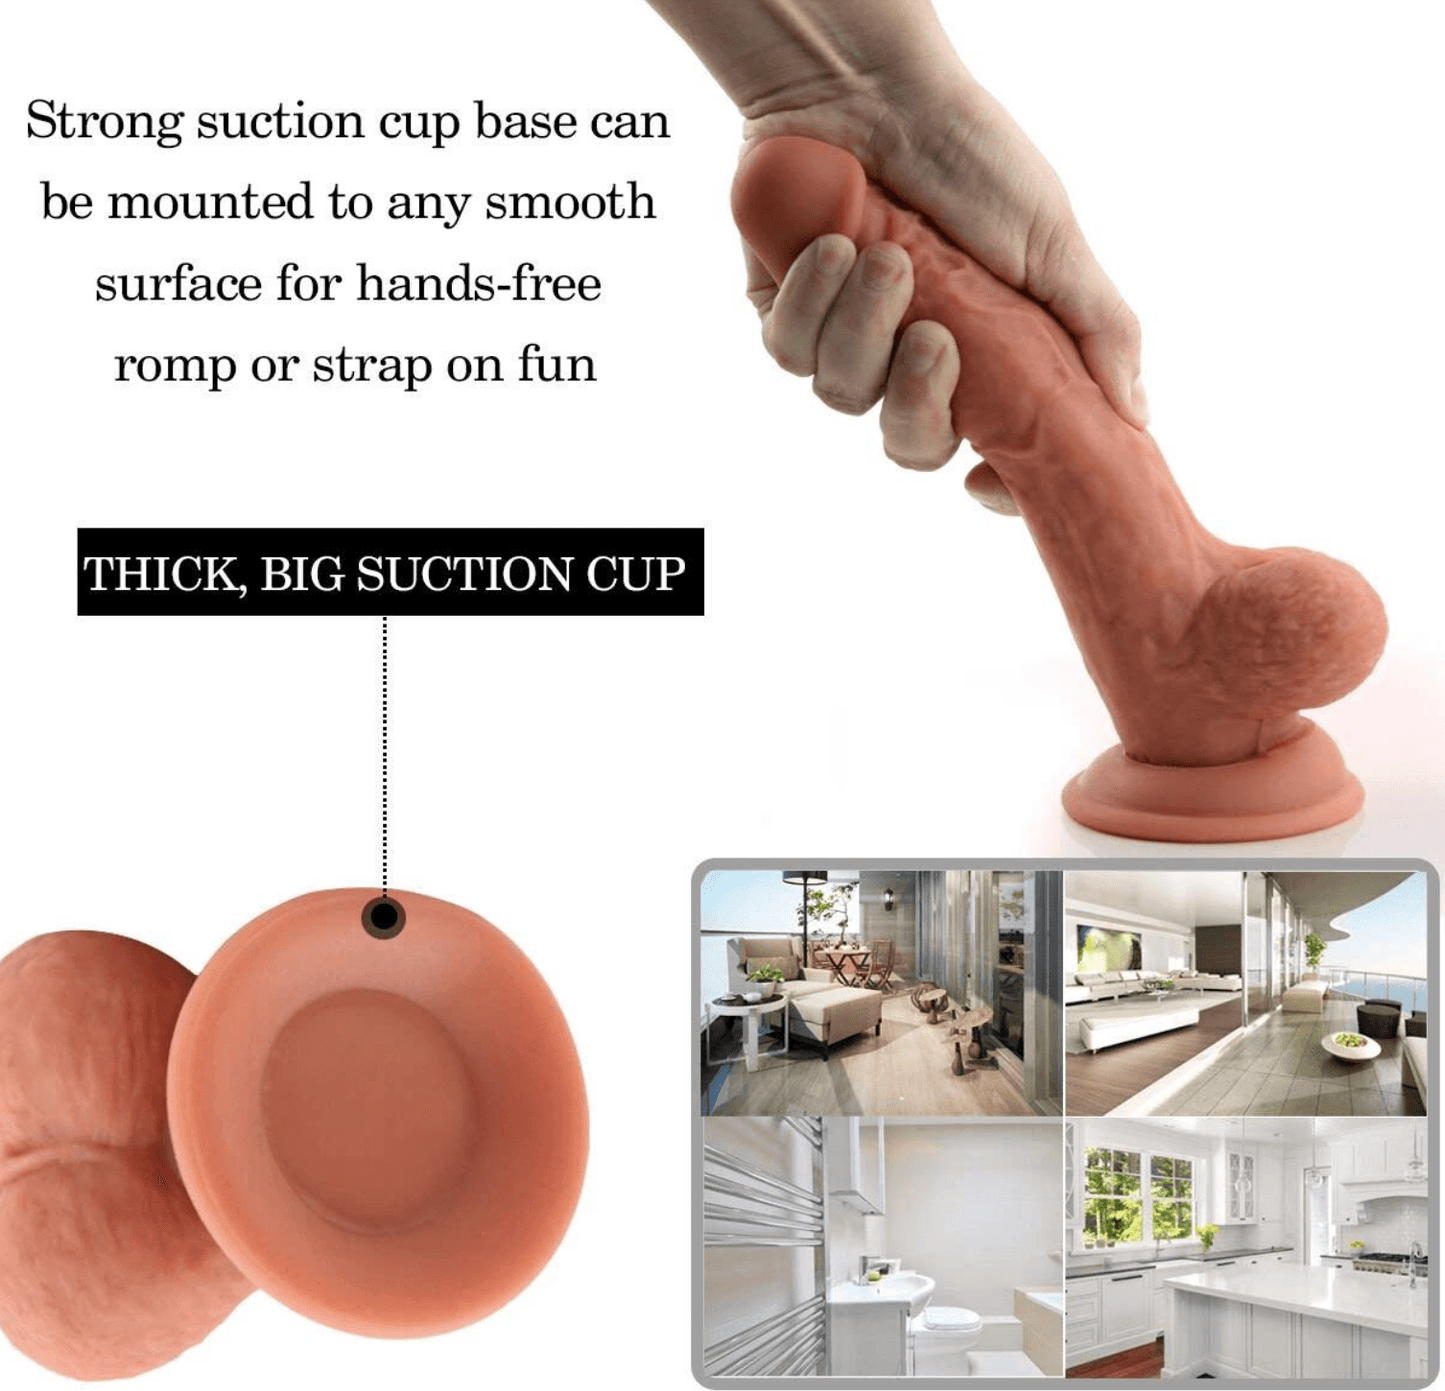 Realistic 8 Inch Remote Vibrating Dildo - Gays+ Store